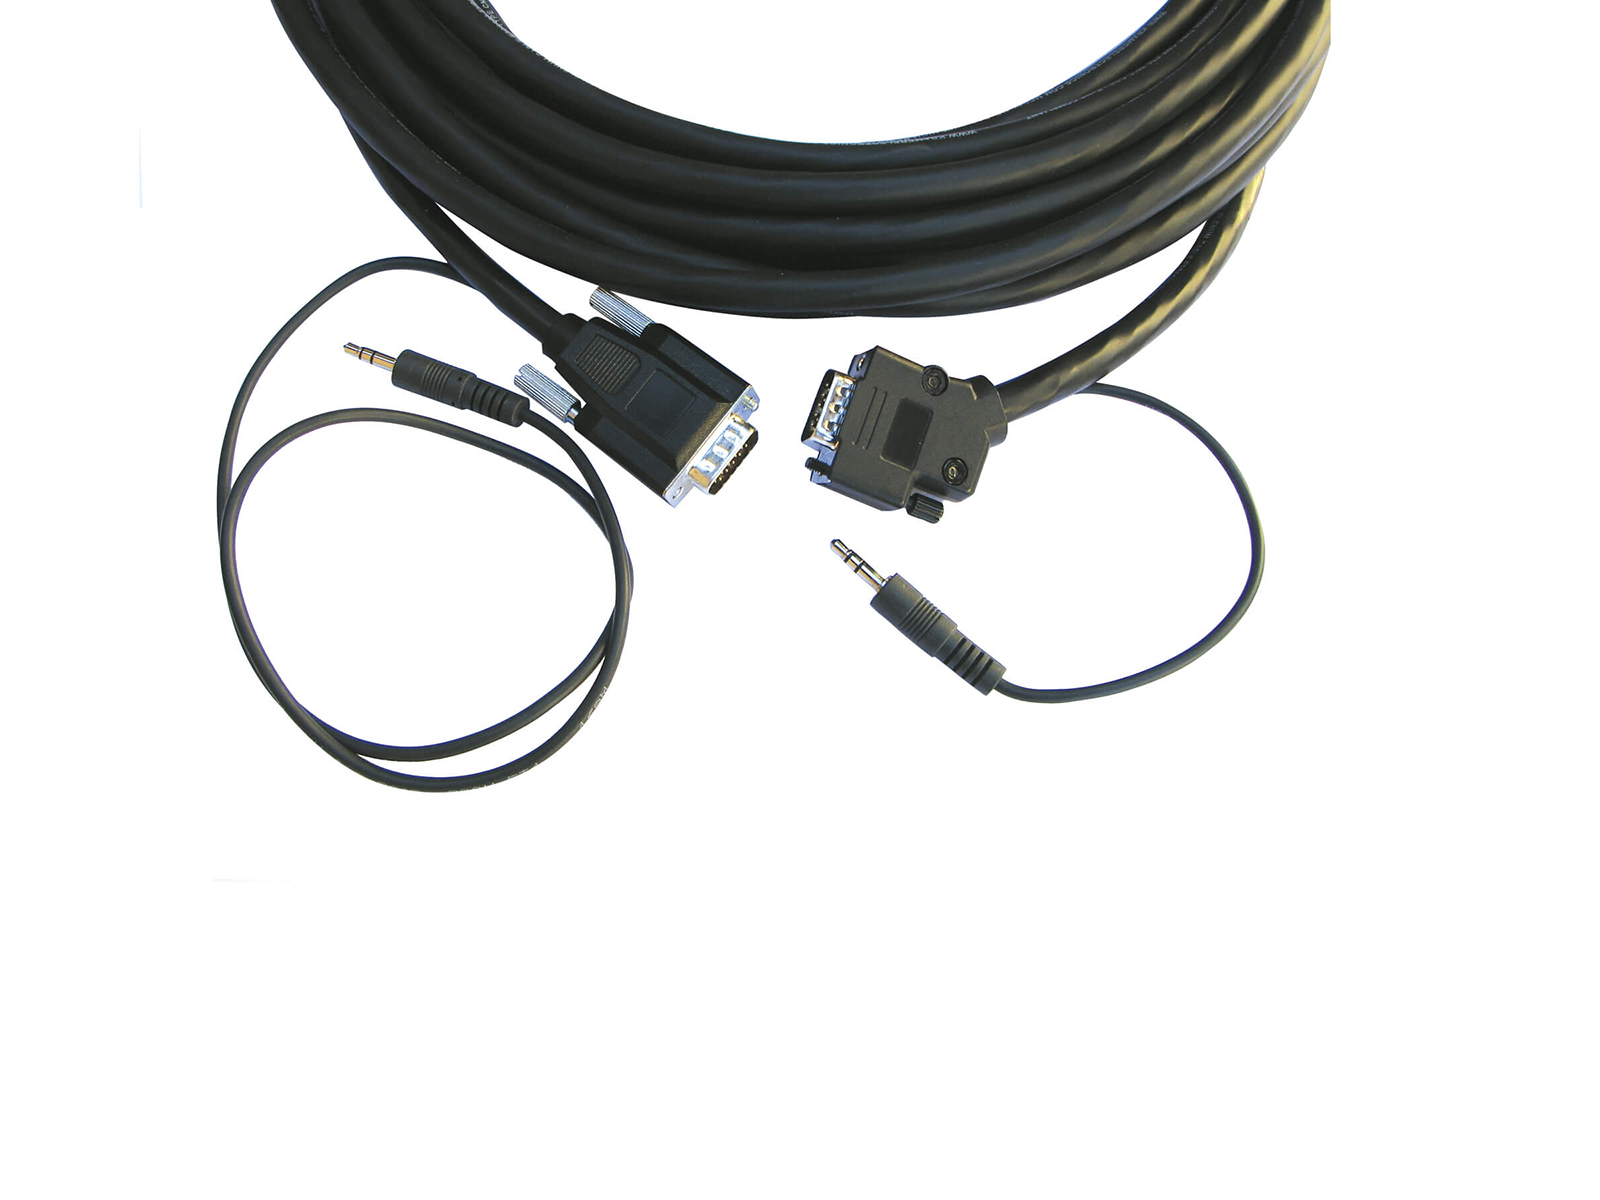 CP-GMA/GMA/XL-75 15-pin HD (M-M)   3.5mm Plenum Cable/ Molded Straight to Backshell 45 - 75ft by Kramer